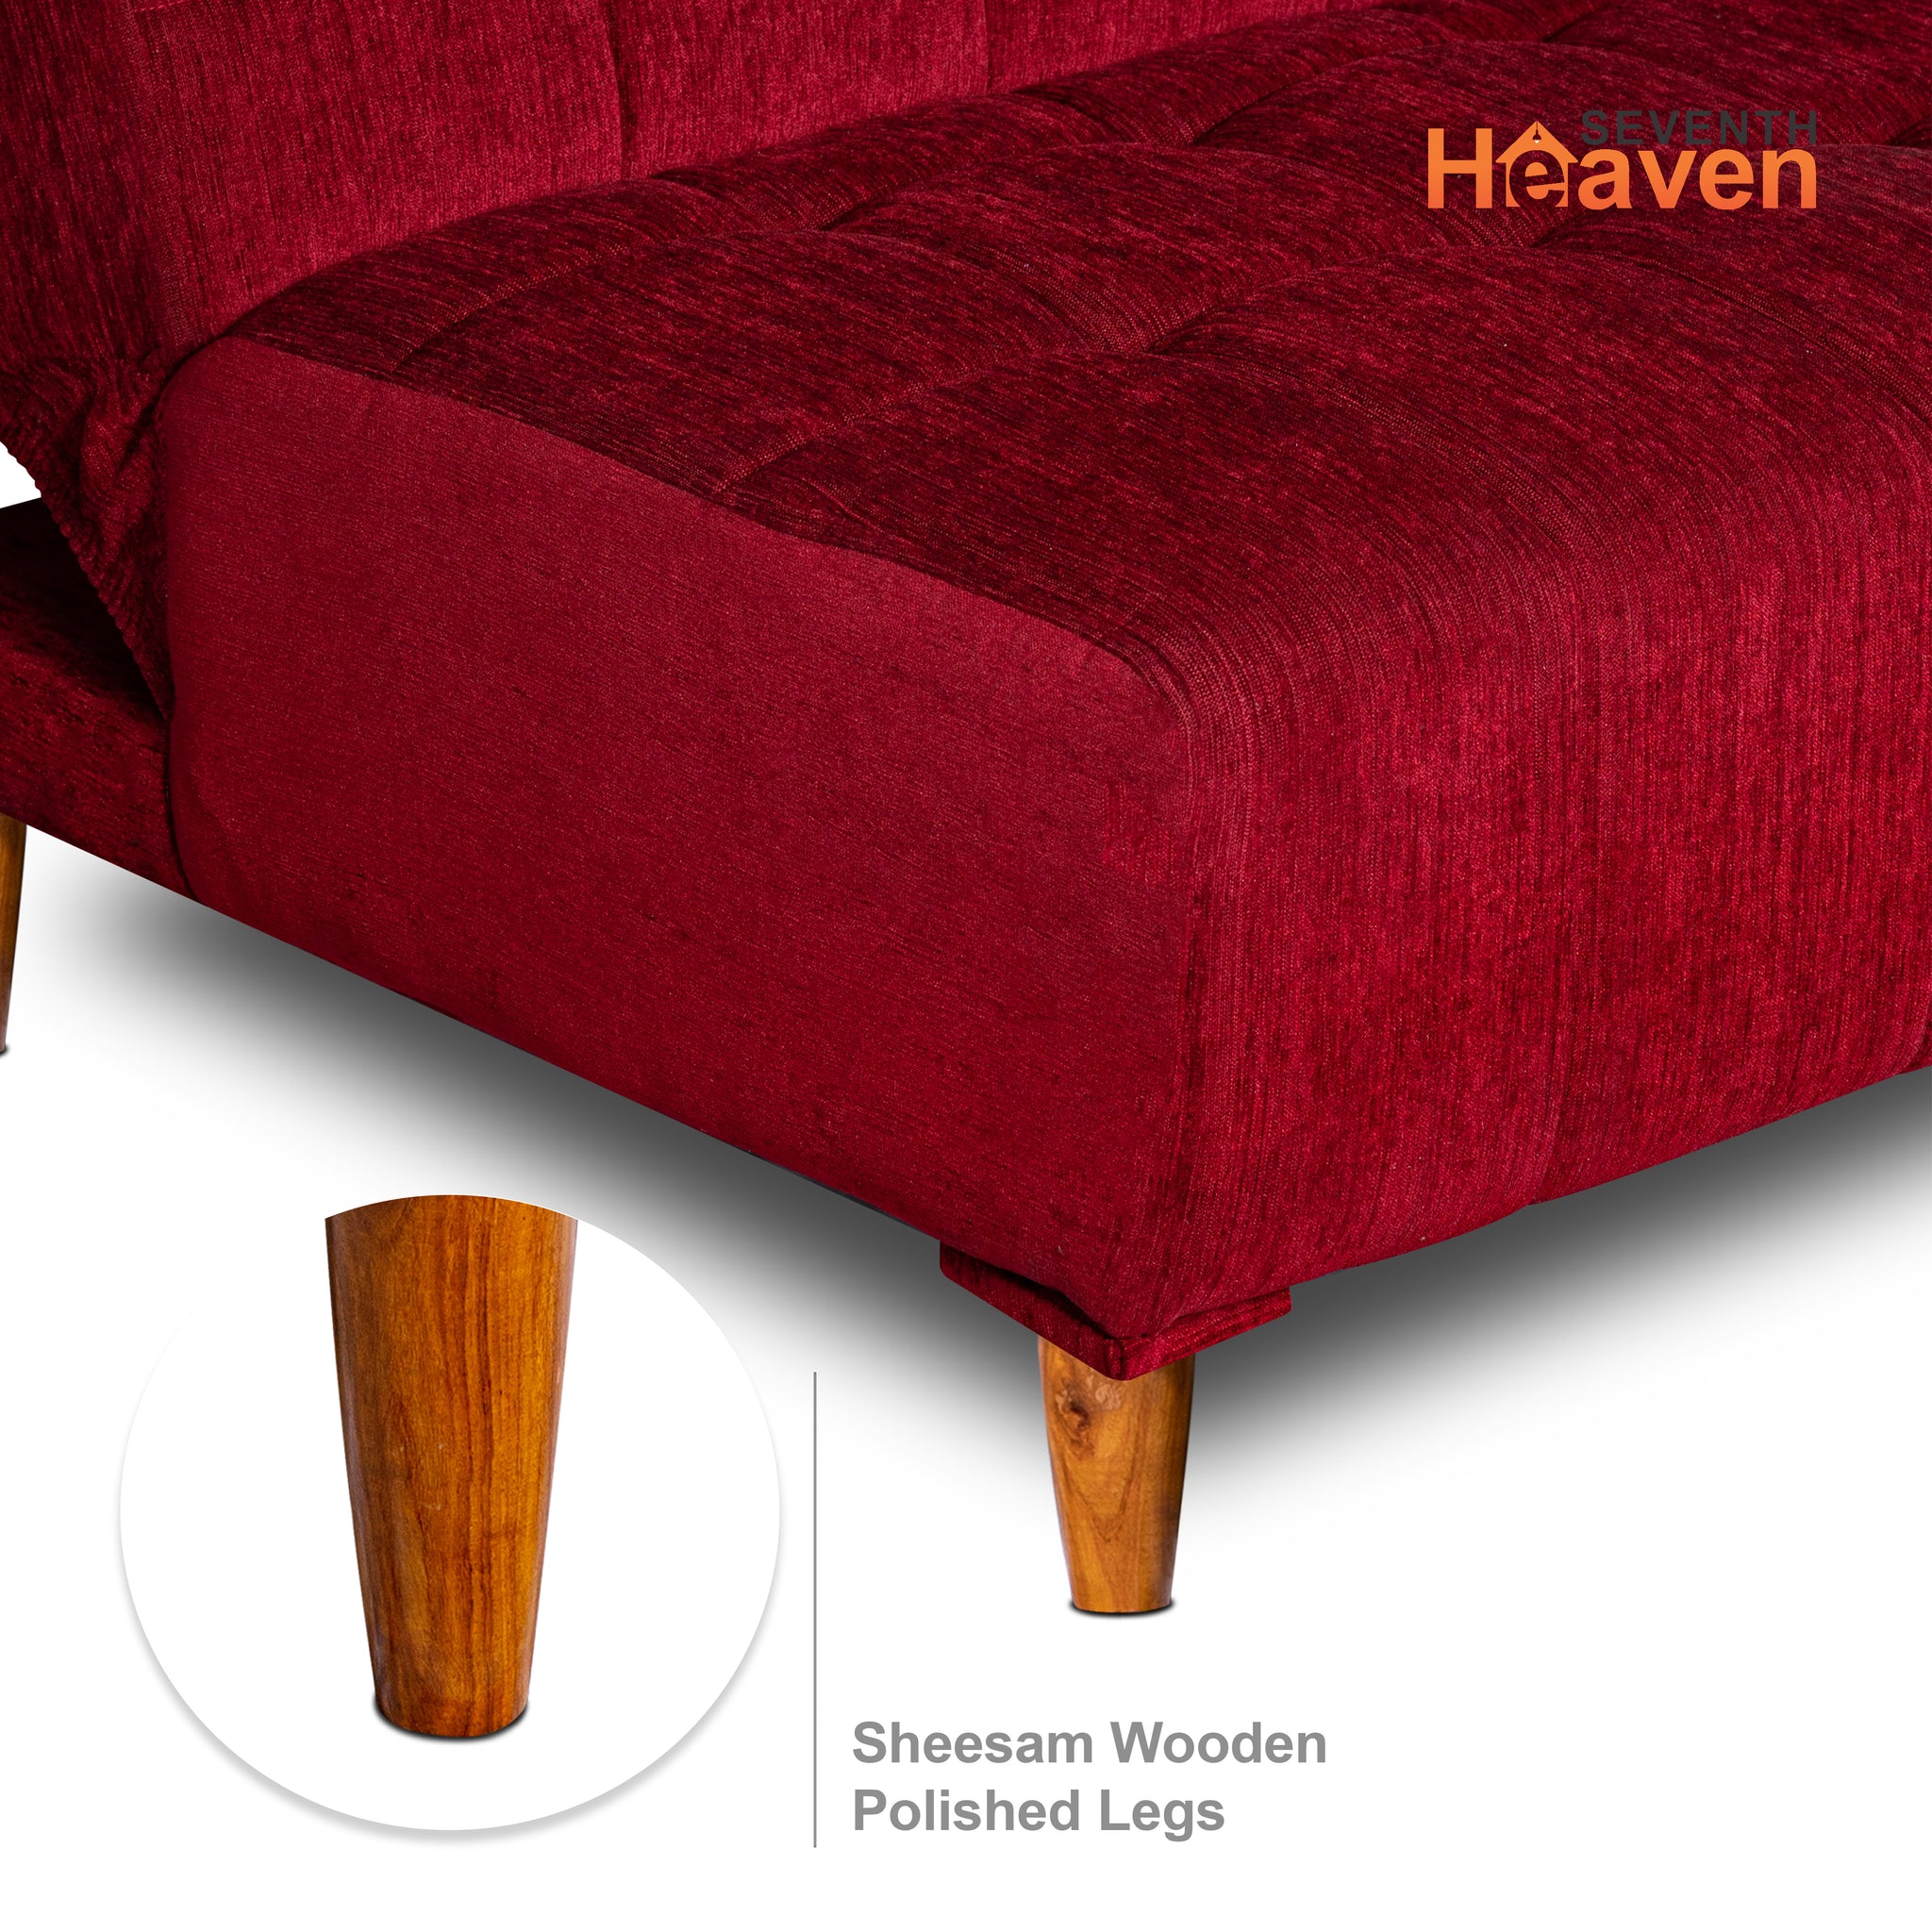 Seventh Heaven Florida 4 Seater Wooden Sofa Cum Bed. Modern & Elegant Smart Furniture Range for luxurious homes, living rooms and offices. Use as a sofa, lounger or bed. Perfect for guests. Molphino fabric with sheesham polished wooden legs. Maroon colour.